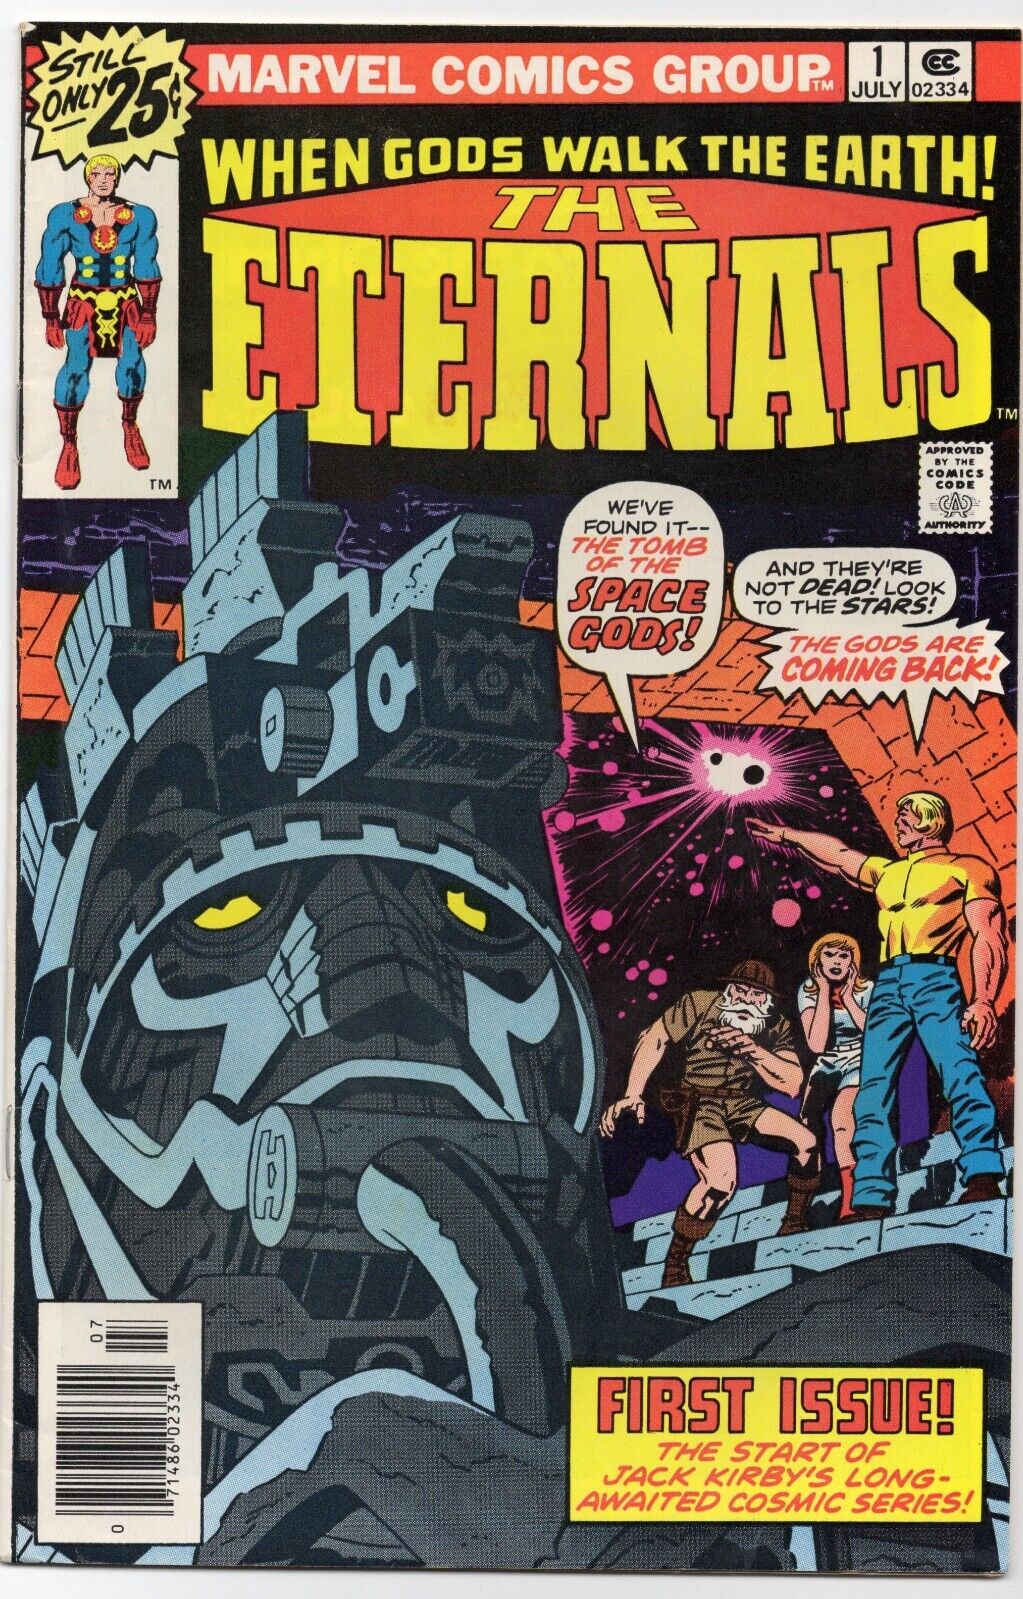 THE ETERNALS #1-19 + Annual - MARVEL Comics (1976) JACK KIRBY- FULL COMPLETE RUN